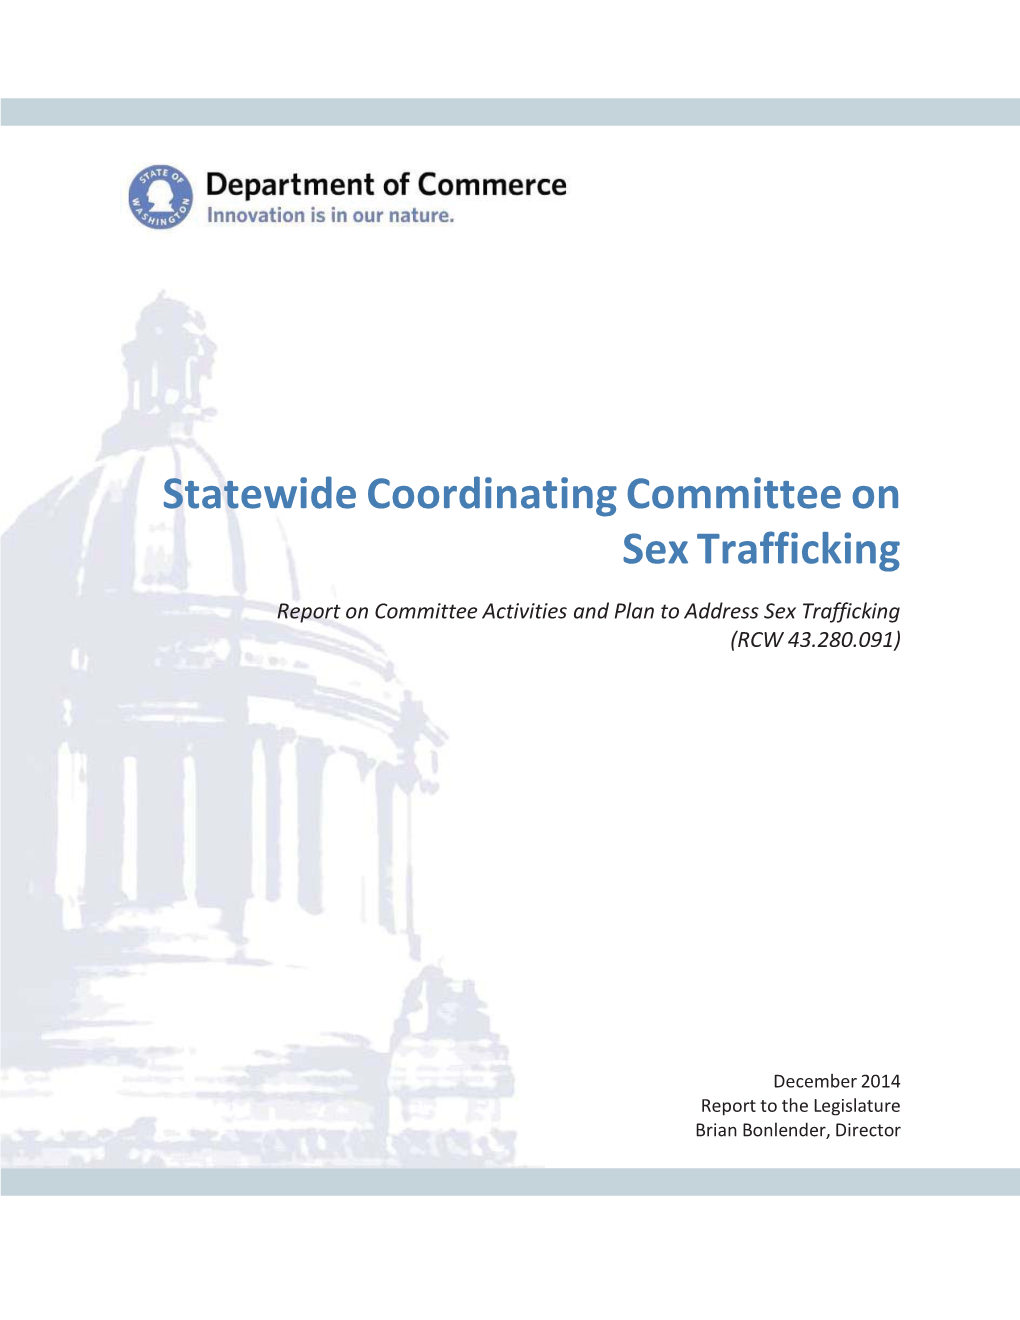 Statewide Coordinating Committee on Sex Trafficking